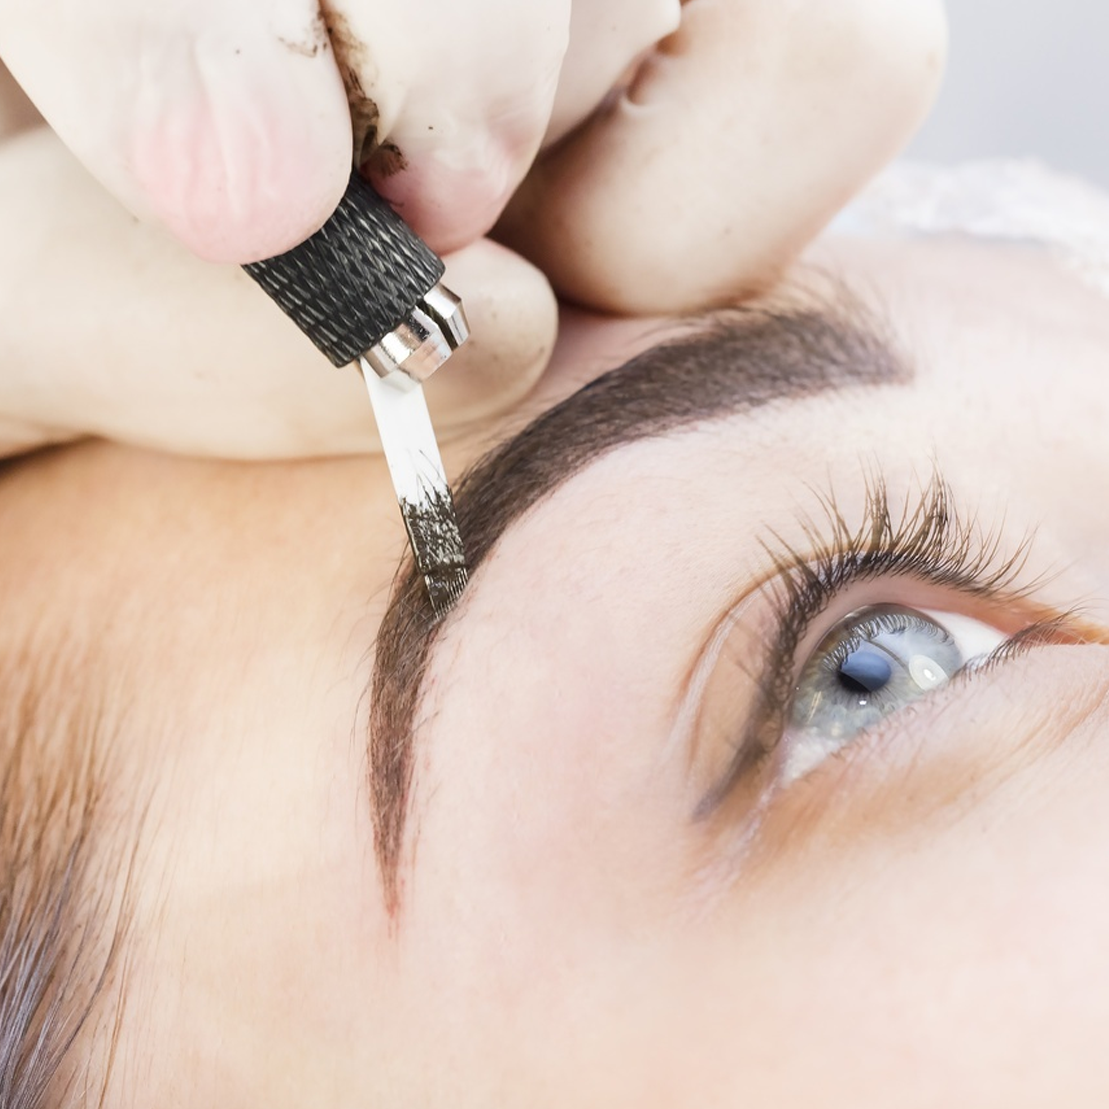 What Is the Average Cost of Eyebrow Tattooing?